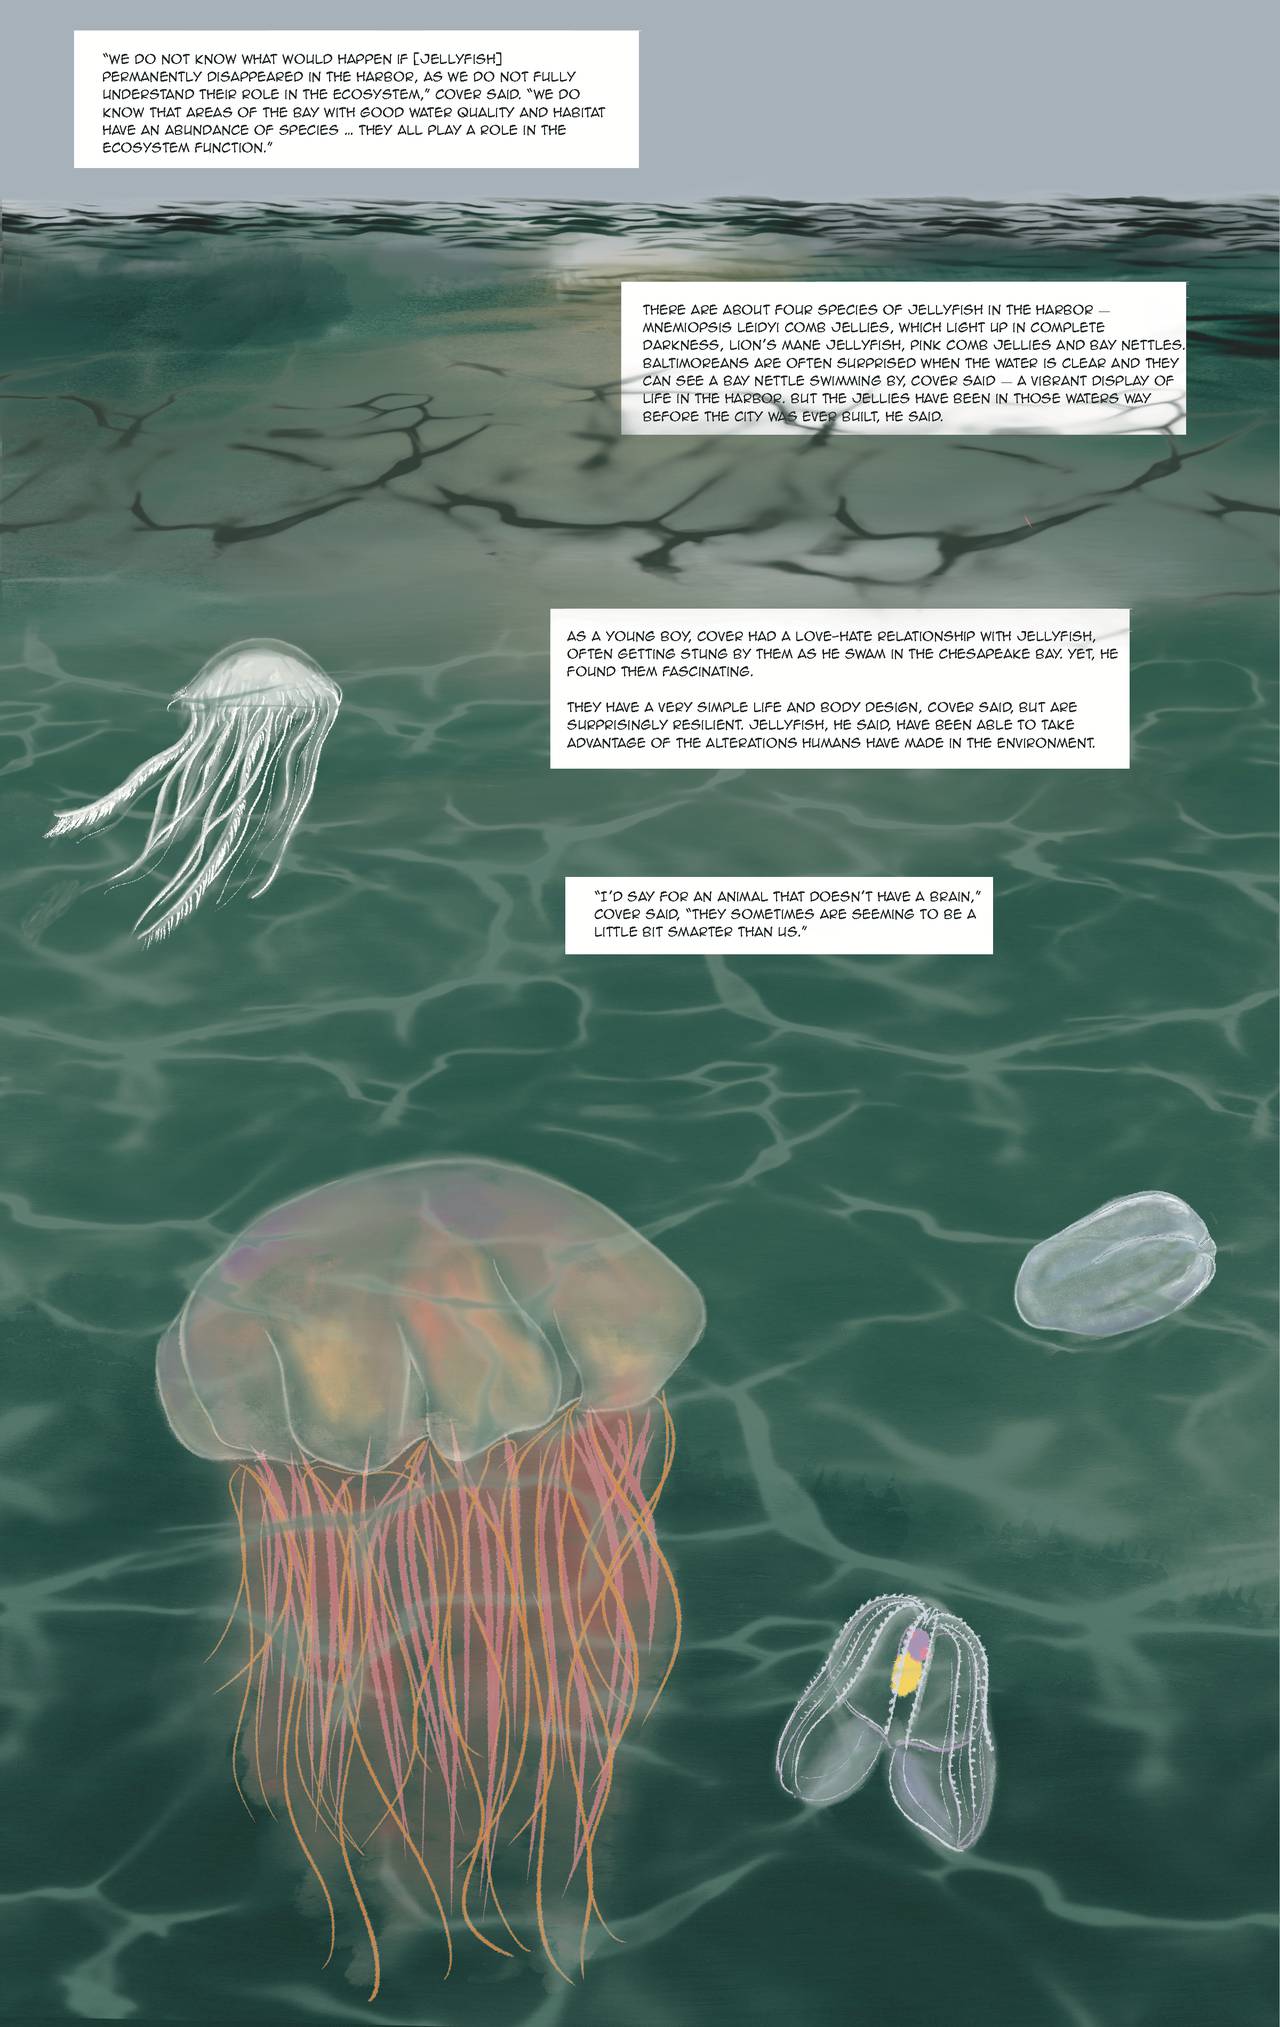 "We do not know what would happen if [jellyfish] permanently disappeared in the Harbor, as we do not fully understand their role in the ecosystem," Cover said. "We do know that areas of the Bay with good water quality and habitat have an abundance of species... they all play a role in the ecosystem function." There are about four species of jellyfish in the Harbor - mnemiopsis leidyi comb jellies, which light up in complete darkness, lion's mane jellyfish, pink comb jellies and bay nettles. Baltimoreans are often surprised when the water is clear and they can see a bay nettle swimming by, Cover said - a vibrant display of life in the Harbor. But the jellies have been in those waters way before the city was ever build, he said. As a young boy, Cover had a love-hate relationship with jellyfish, often getting stung by them as he swam in the Chesapeake Bay. Yet, he found them fascinating. They have a very simple life and body design, Cover said, but are surprisingly resilient. Jellyfish, he said, have been able to take advantage of the alterations humans have made in the environment. "I'd say for an animal that doesn't have a brain," Cover said, "they sometimes are seeming to be a little bit smarter than us."